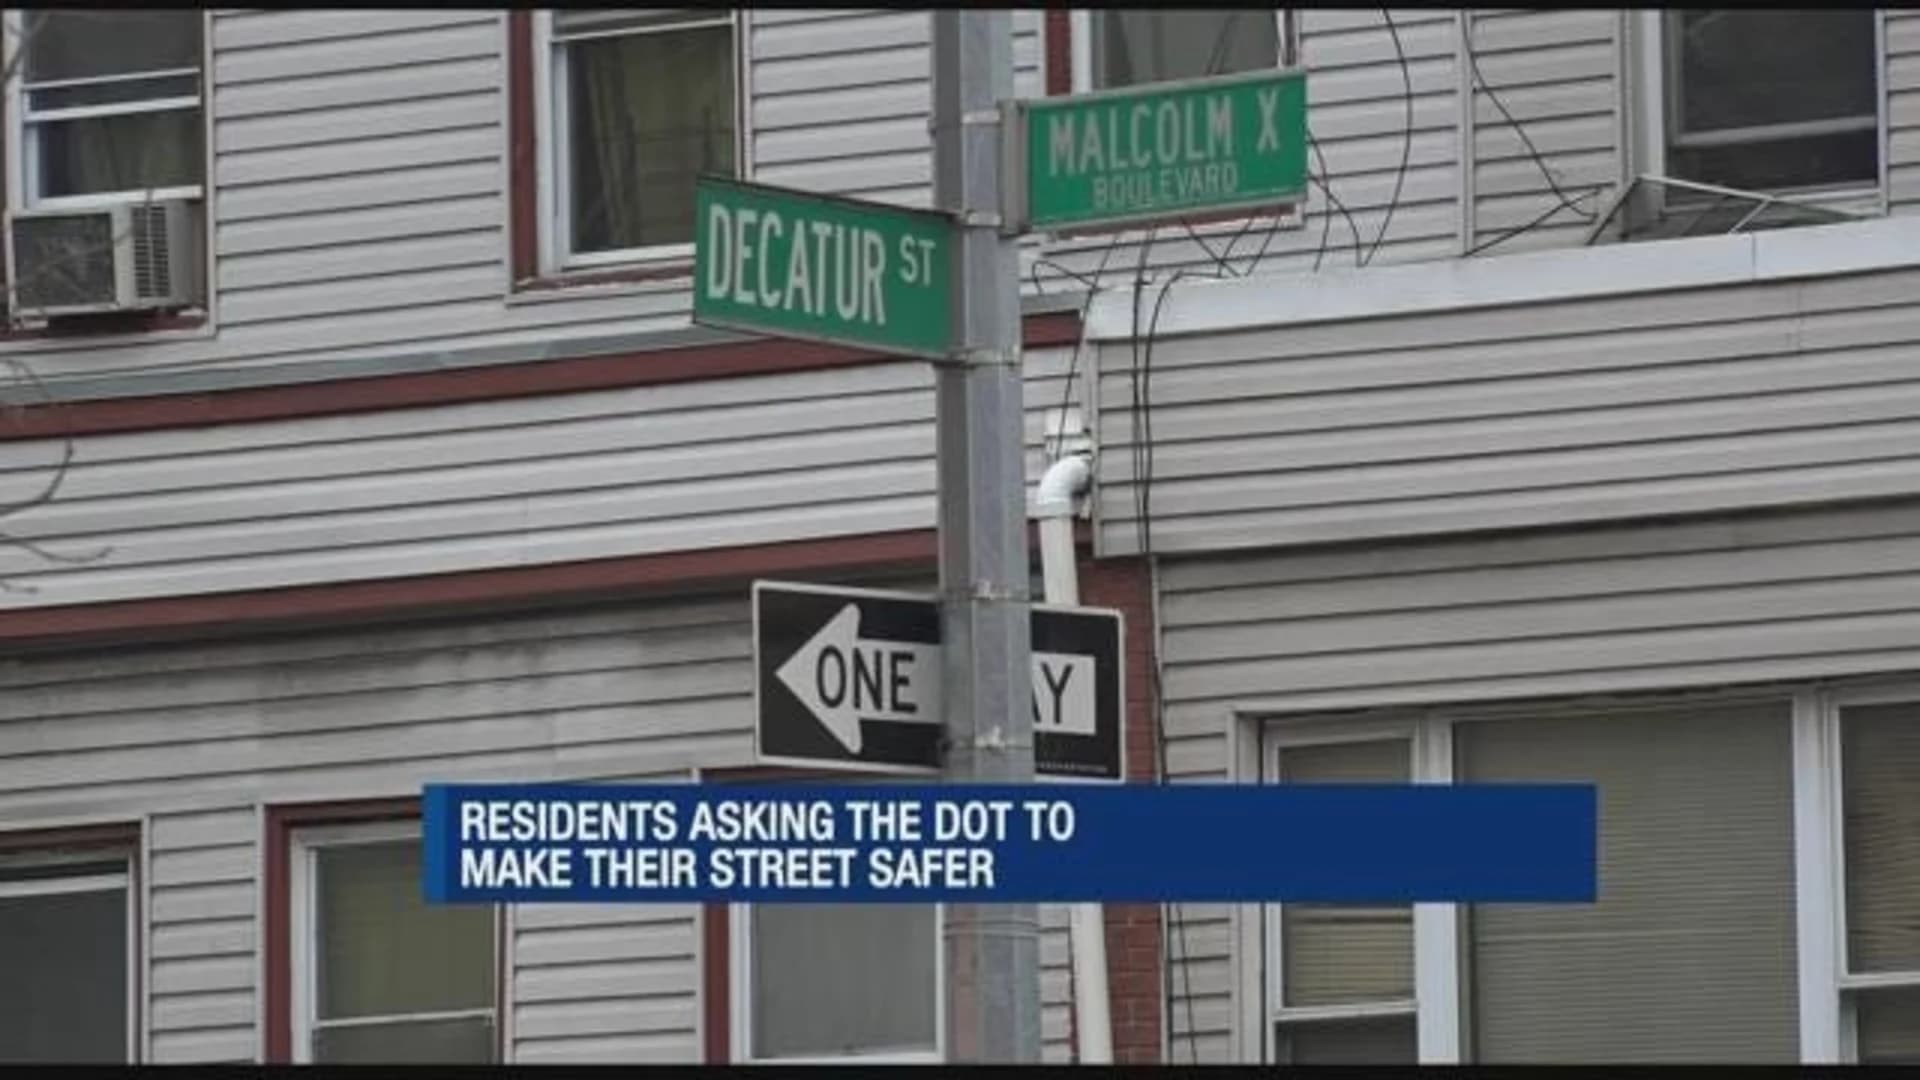 Decatur Street residents call on DOT for speed bumps, safety signs